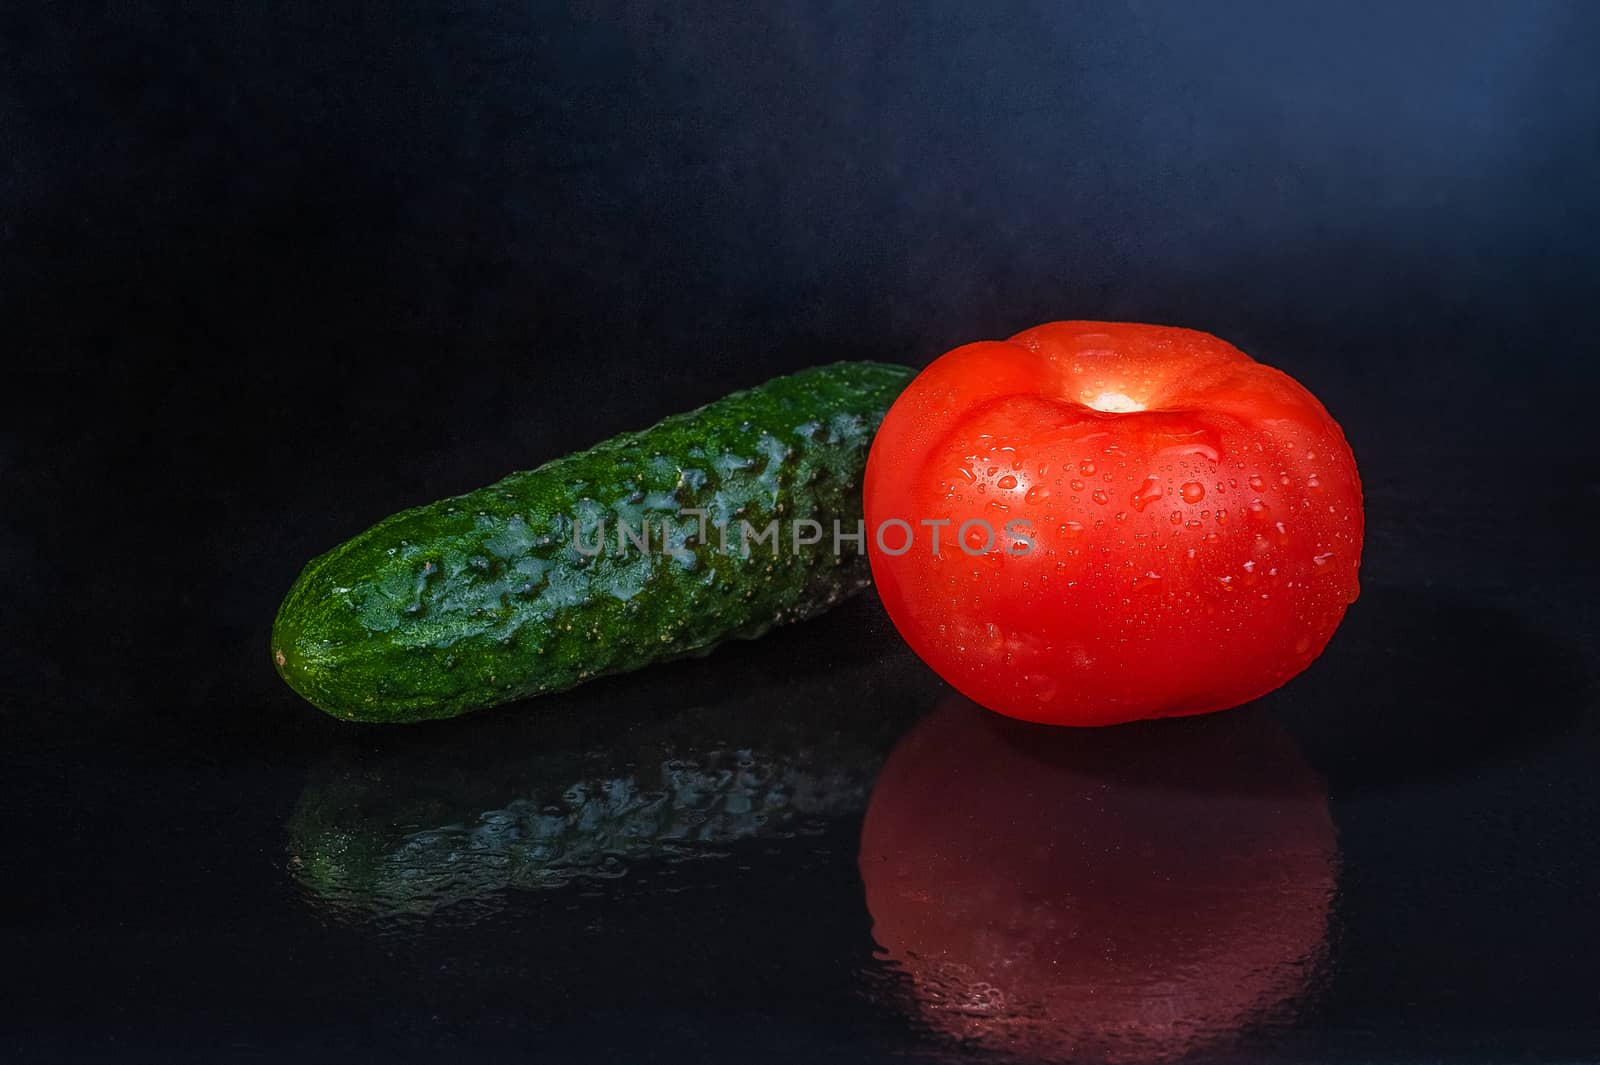 fresh vegetables - green cucumber and red tomato on an isolated black background with reflection